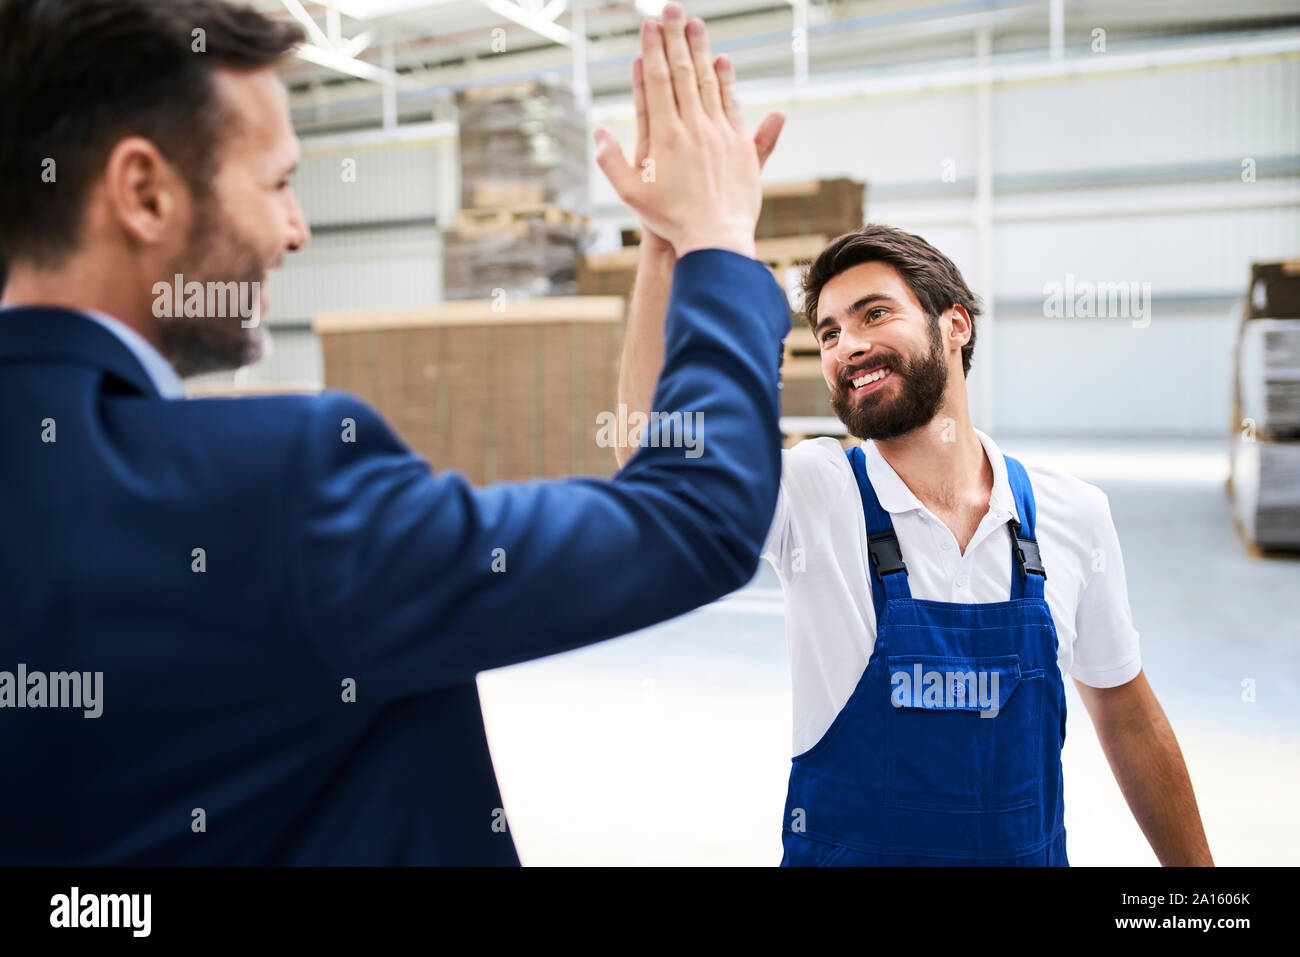 Happy businessman and worker high fiving in a factory Stock Photo